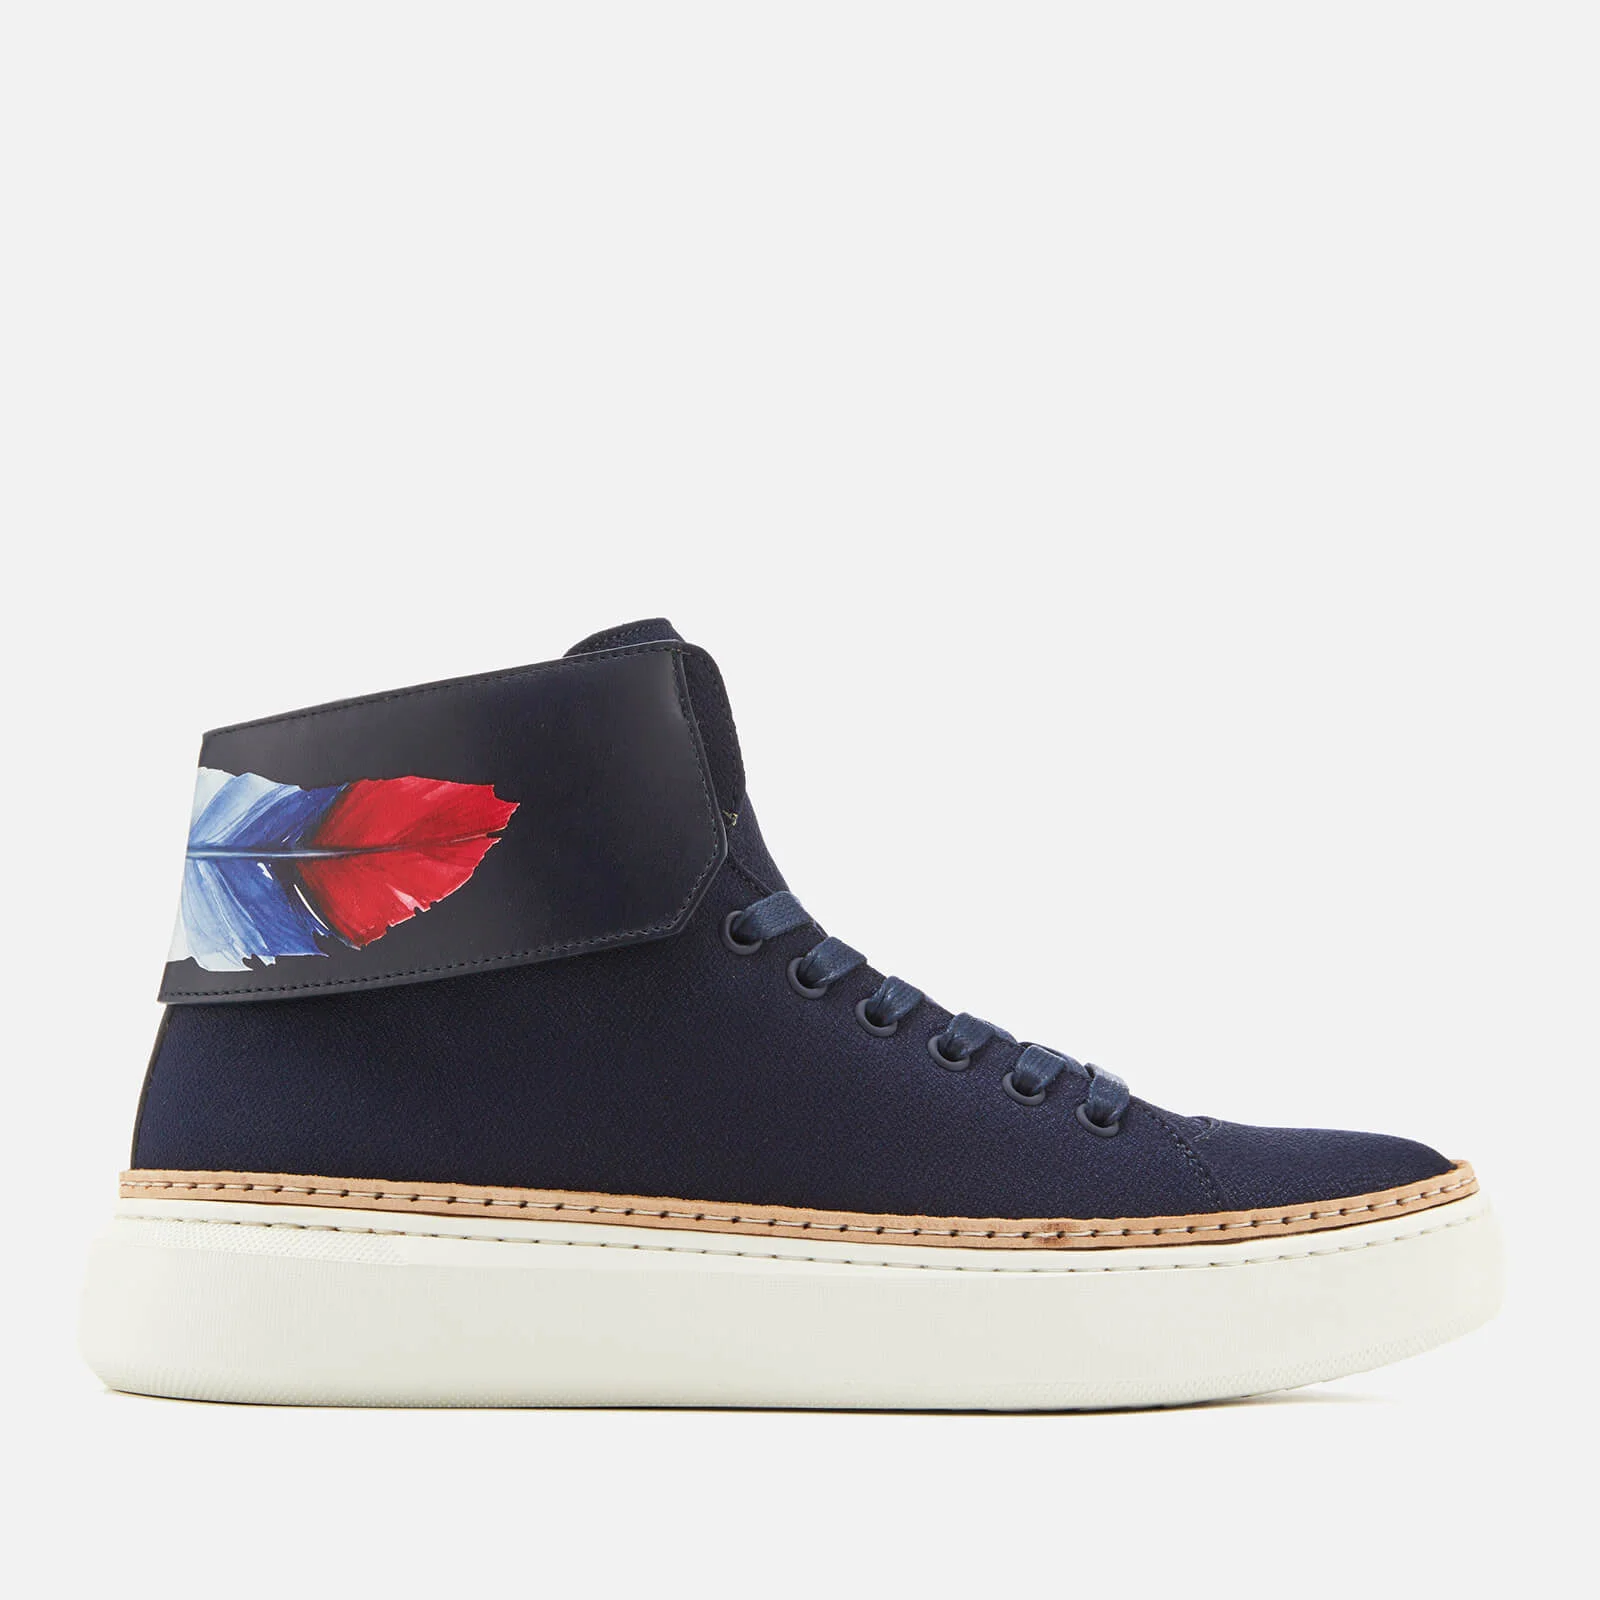 Buscemi Men's 90MM Crepone Trainers - Navy Image 1